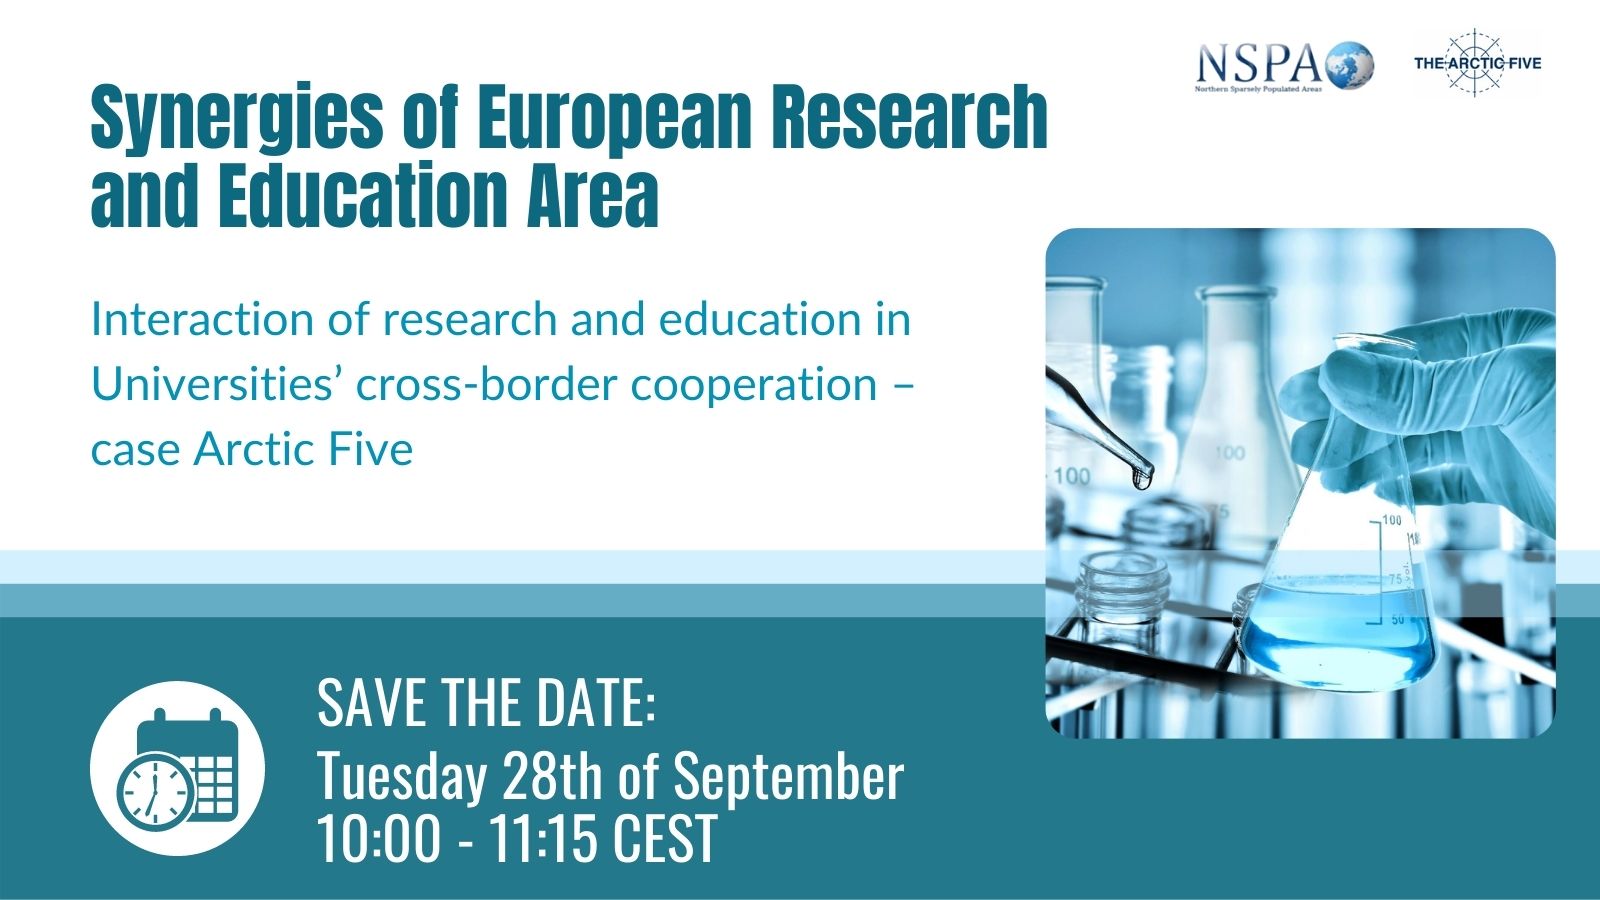 Save the date - Synergies of European Research and Education Areas